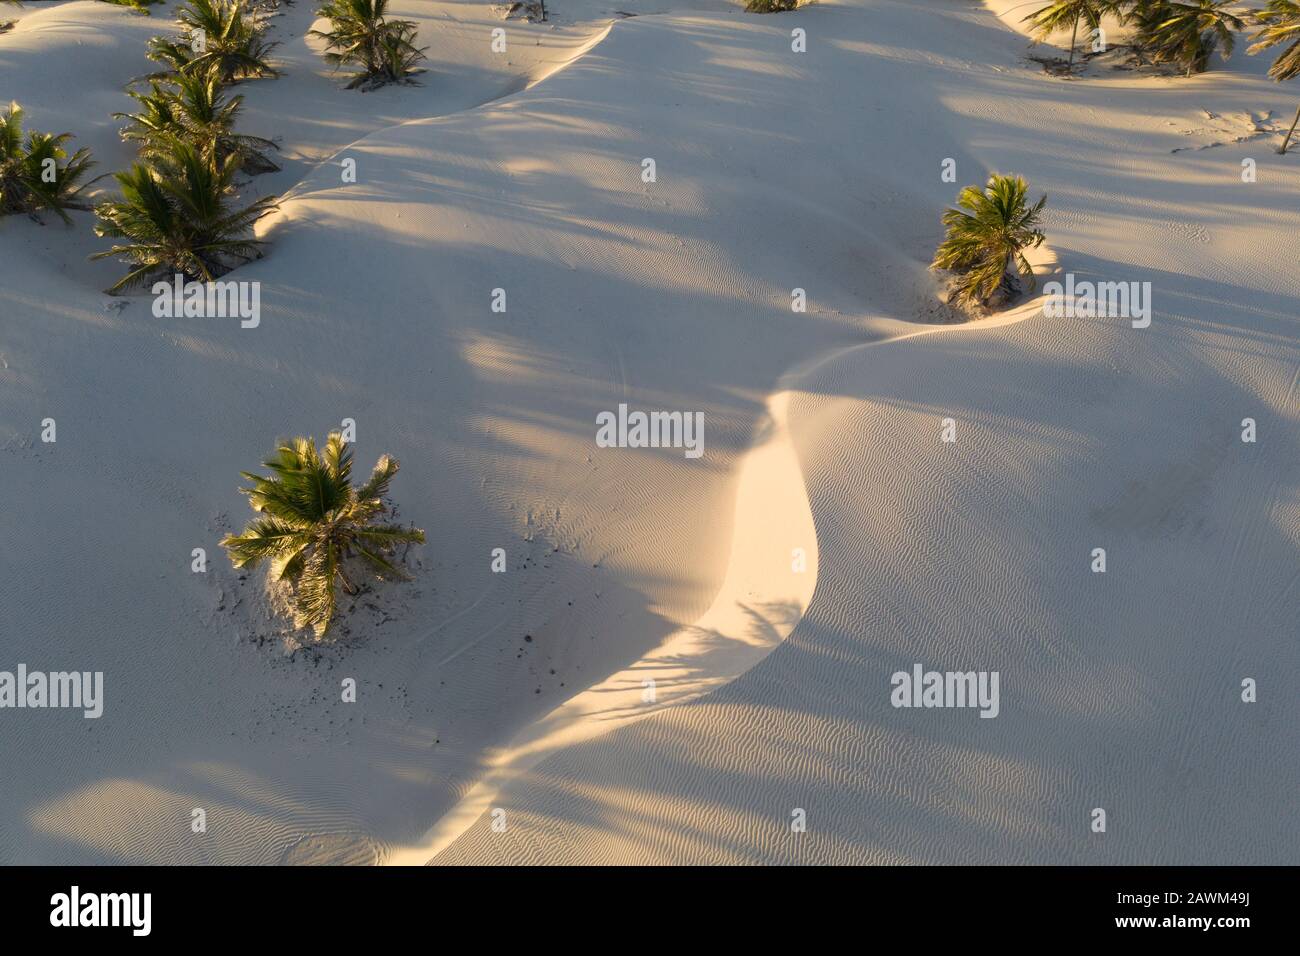 natural structures formed by the wind on the beach in brazil Stock Photo